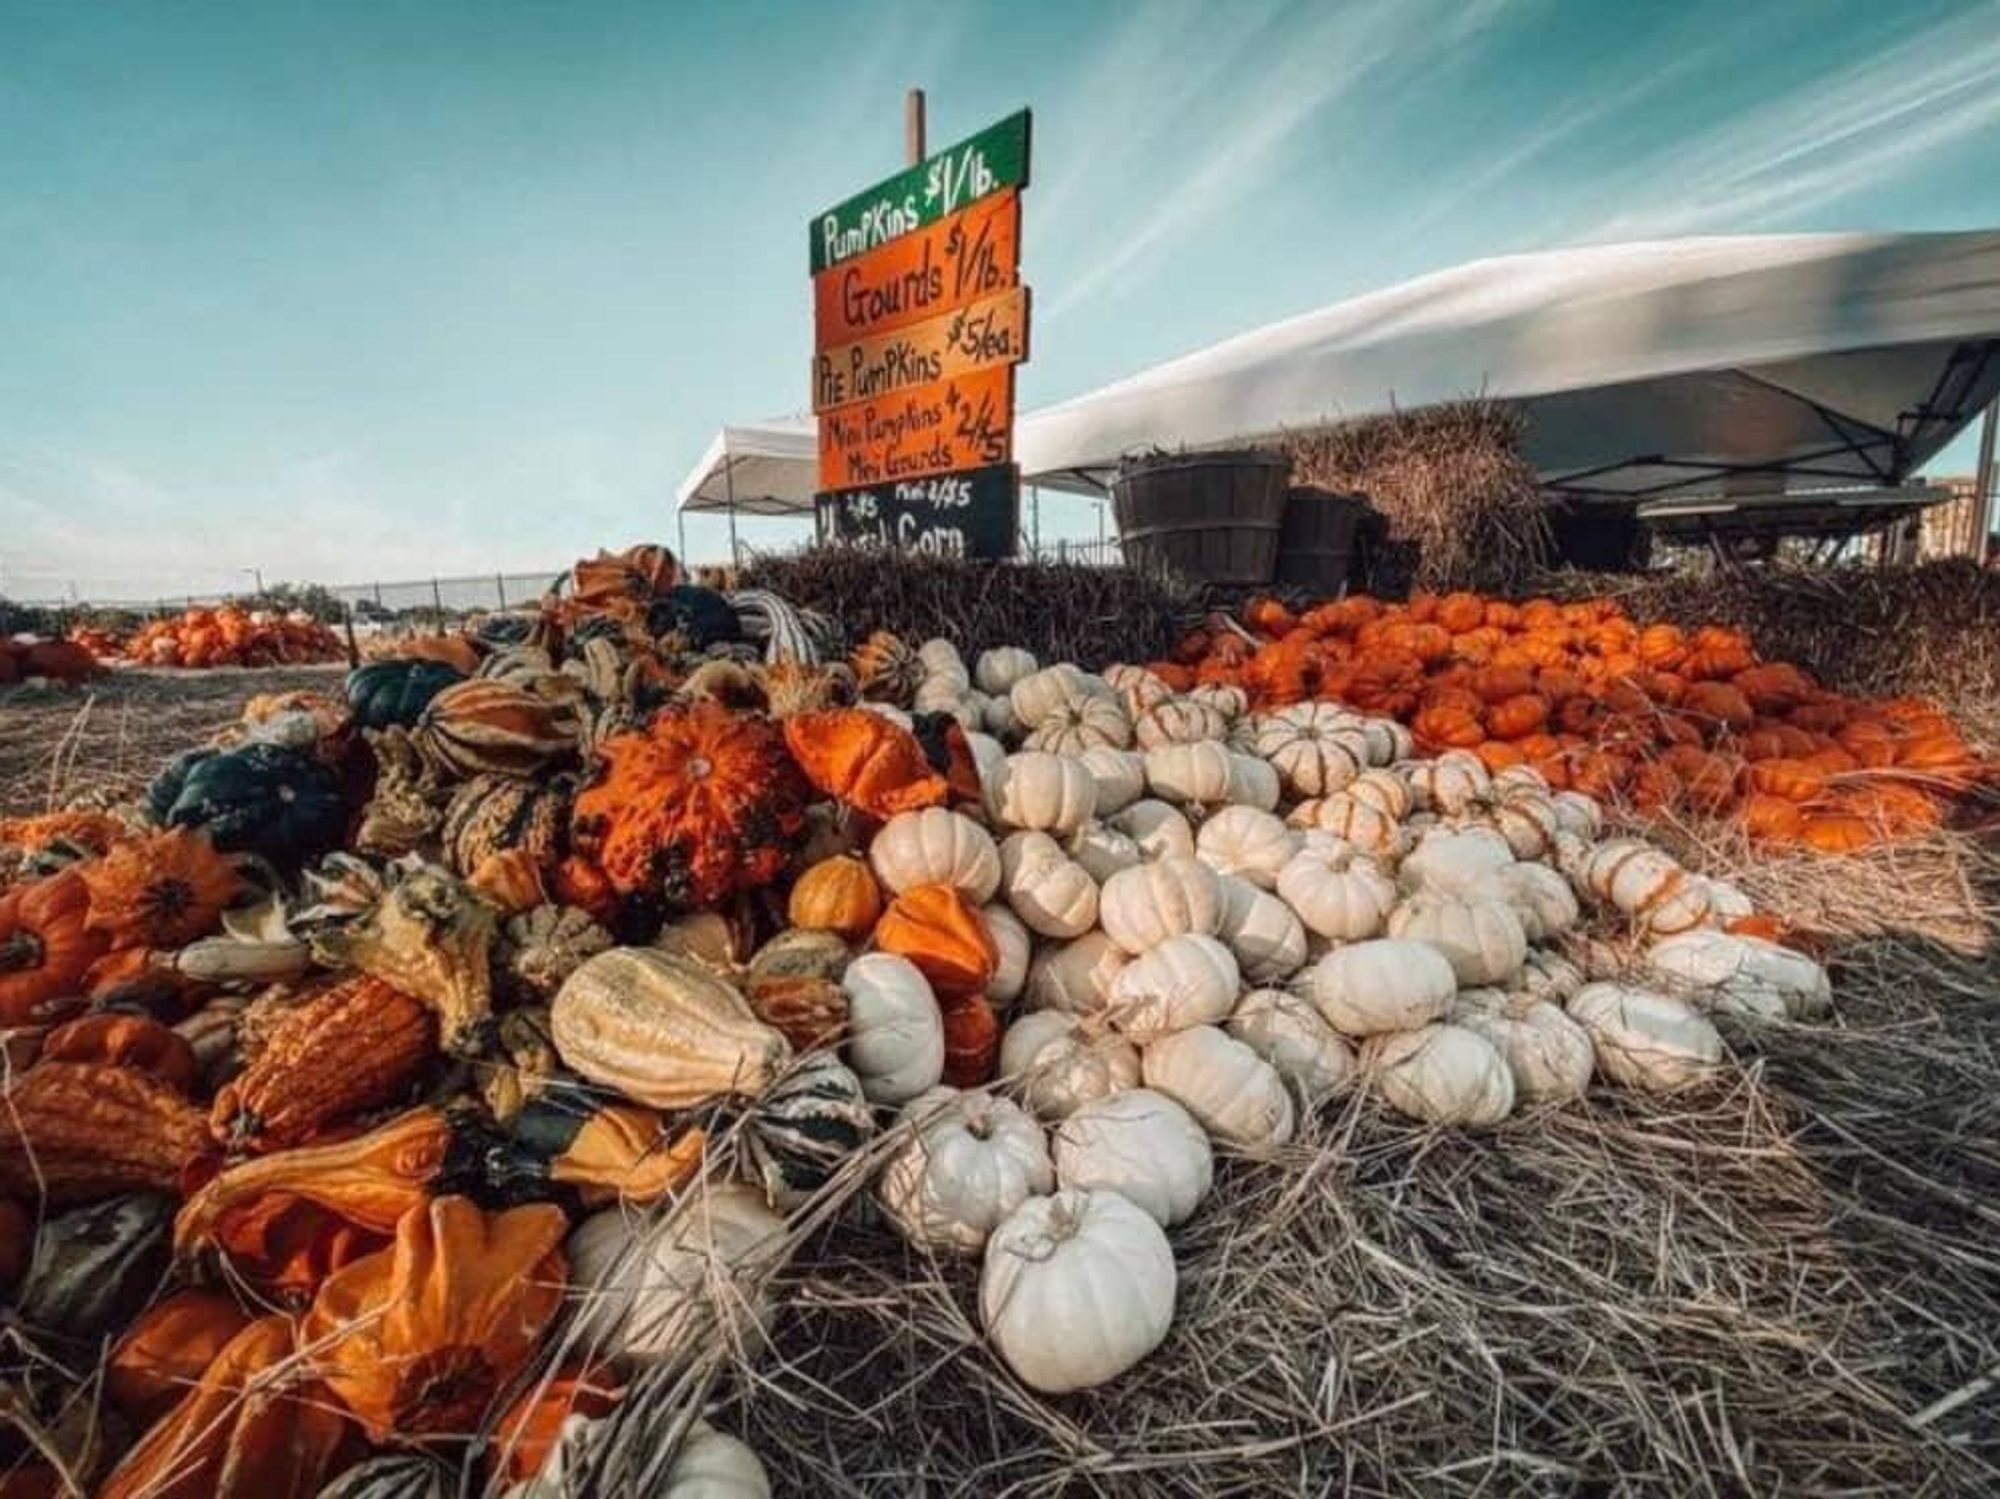 https://austin.culturemap.com/media-library/a-gourd-patch-at-the-dripping-springs-pumpkin-festival.jpg?id=31476496&width=2000&height=1500&quality=85&coordinates=3%2C0%2C3%2C0